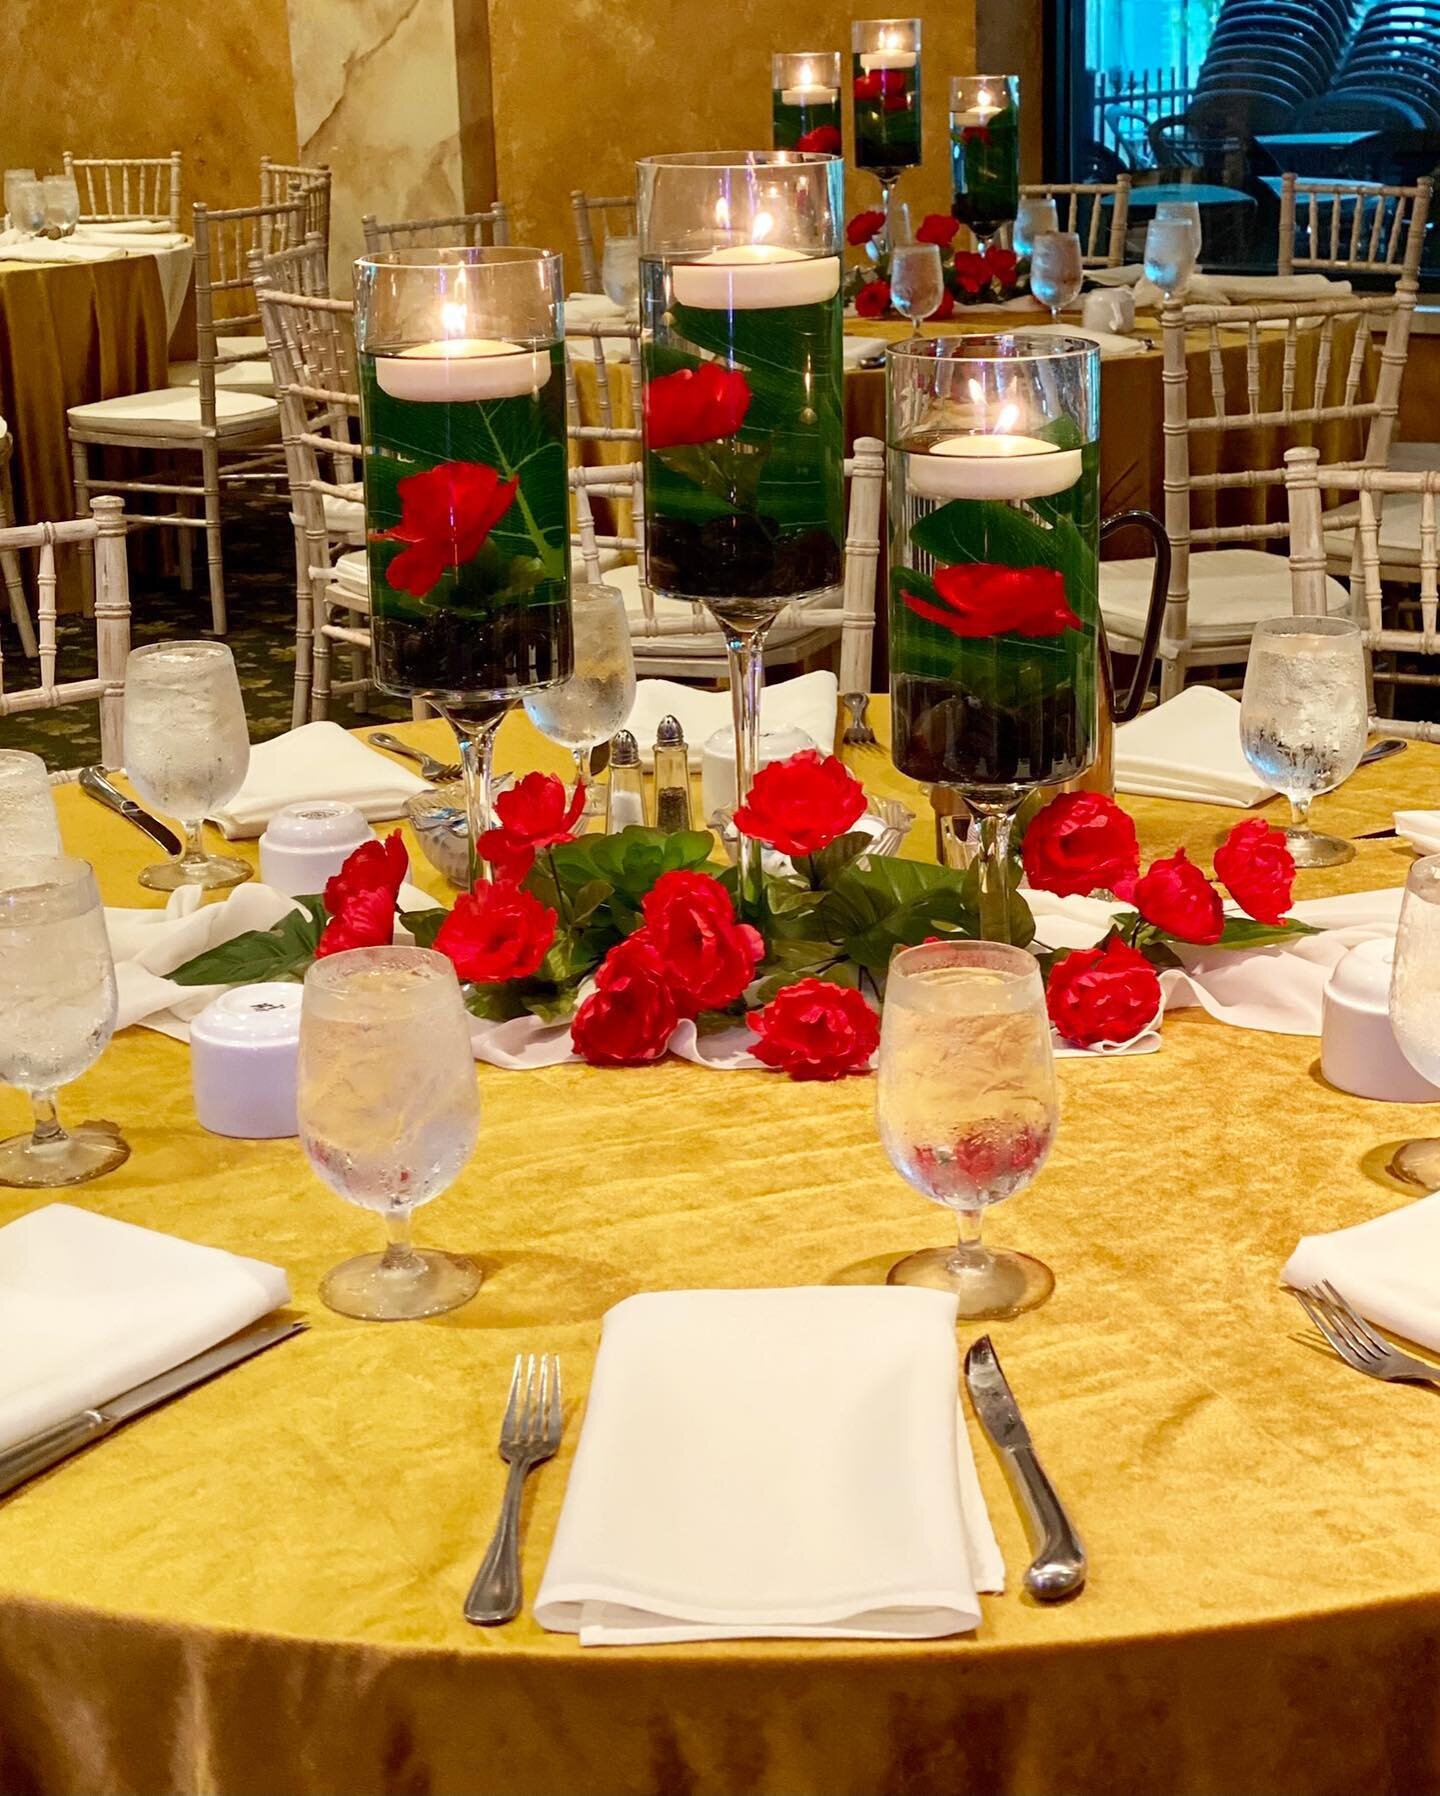 The weather may be gloomy in Appleton this week, but hopefully this pop of color will brighten up your feed! ❤️

We were lucky enough to decorate for a social event last weekend at Pullmans and were able to showcase our new gold velvet linens. How go